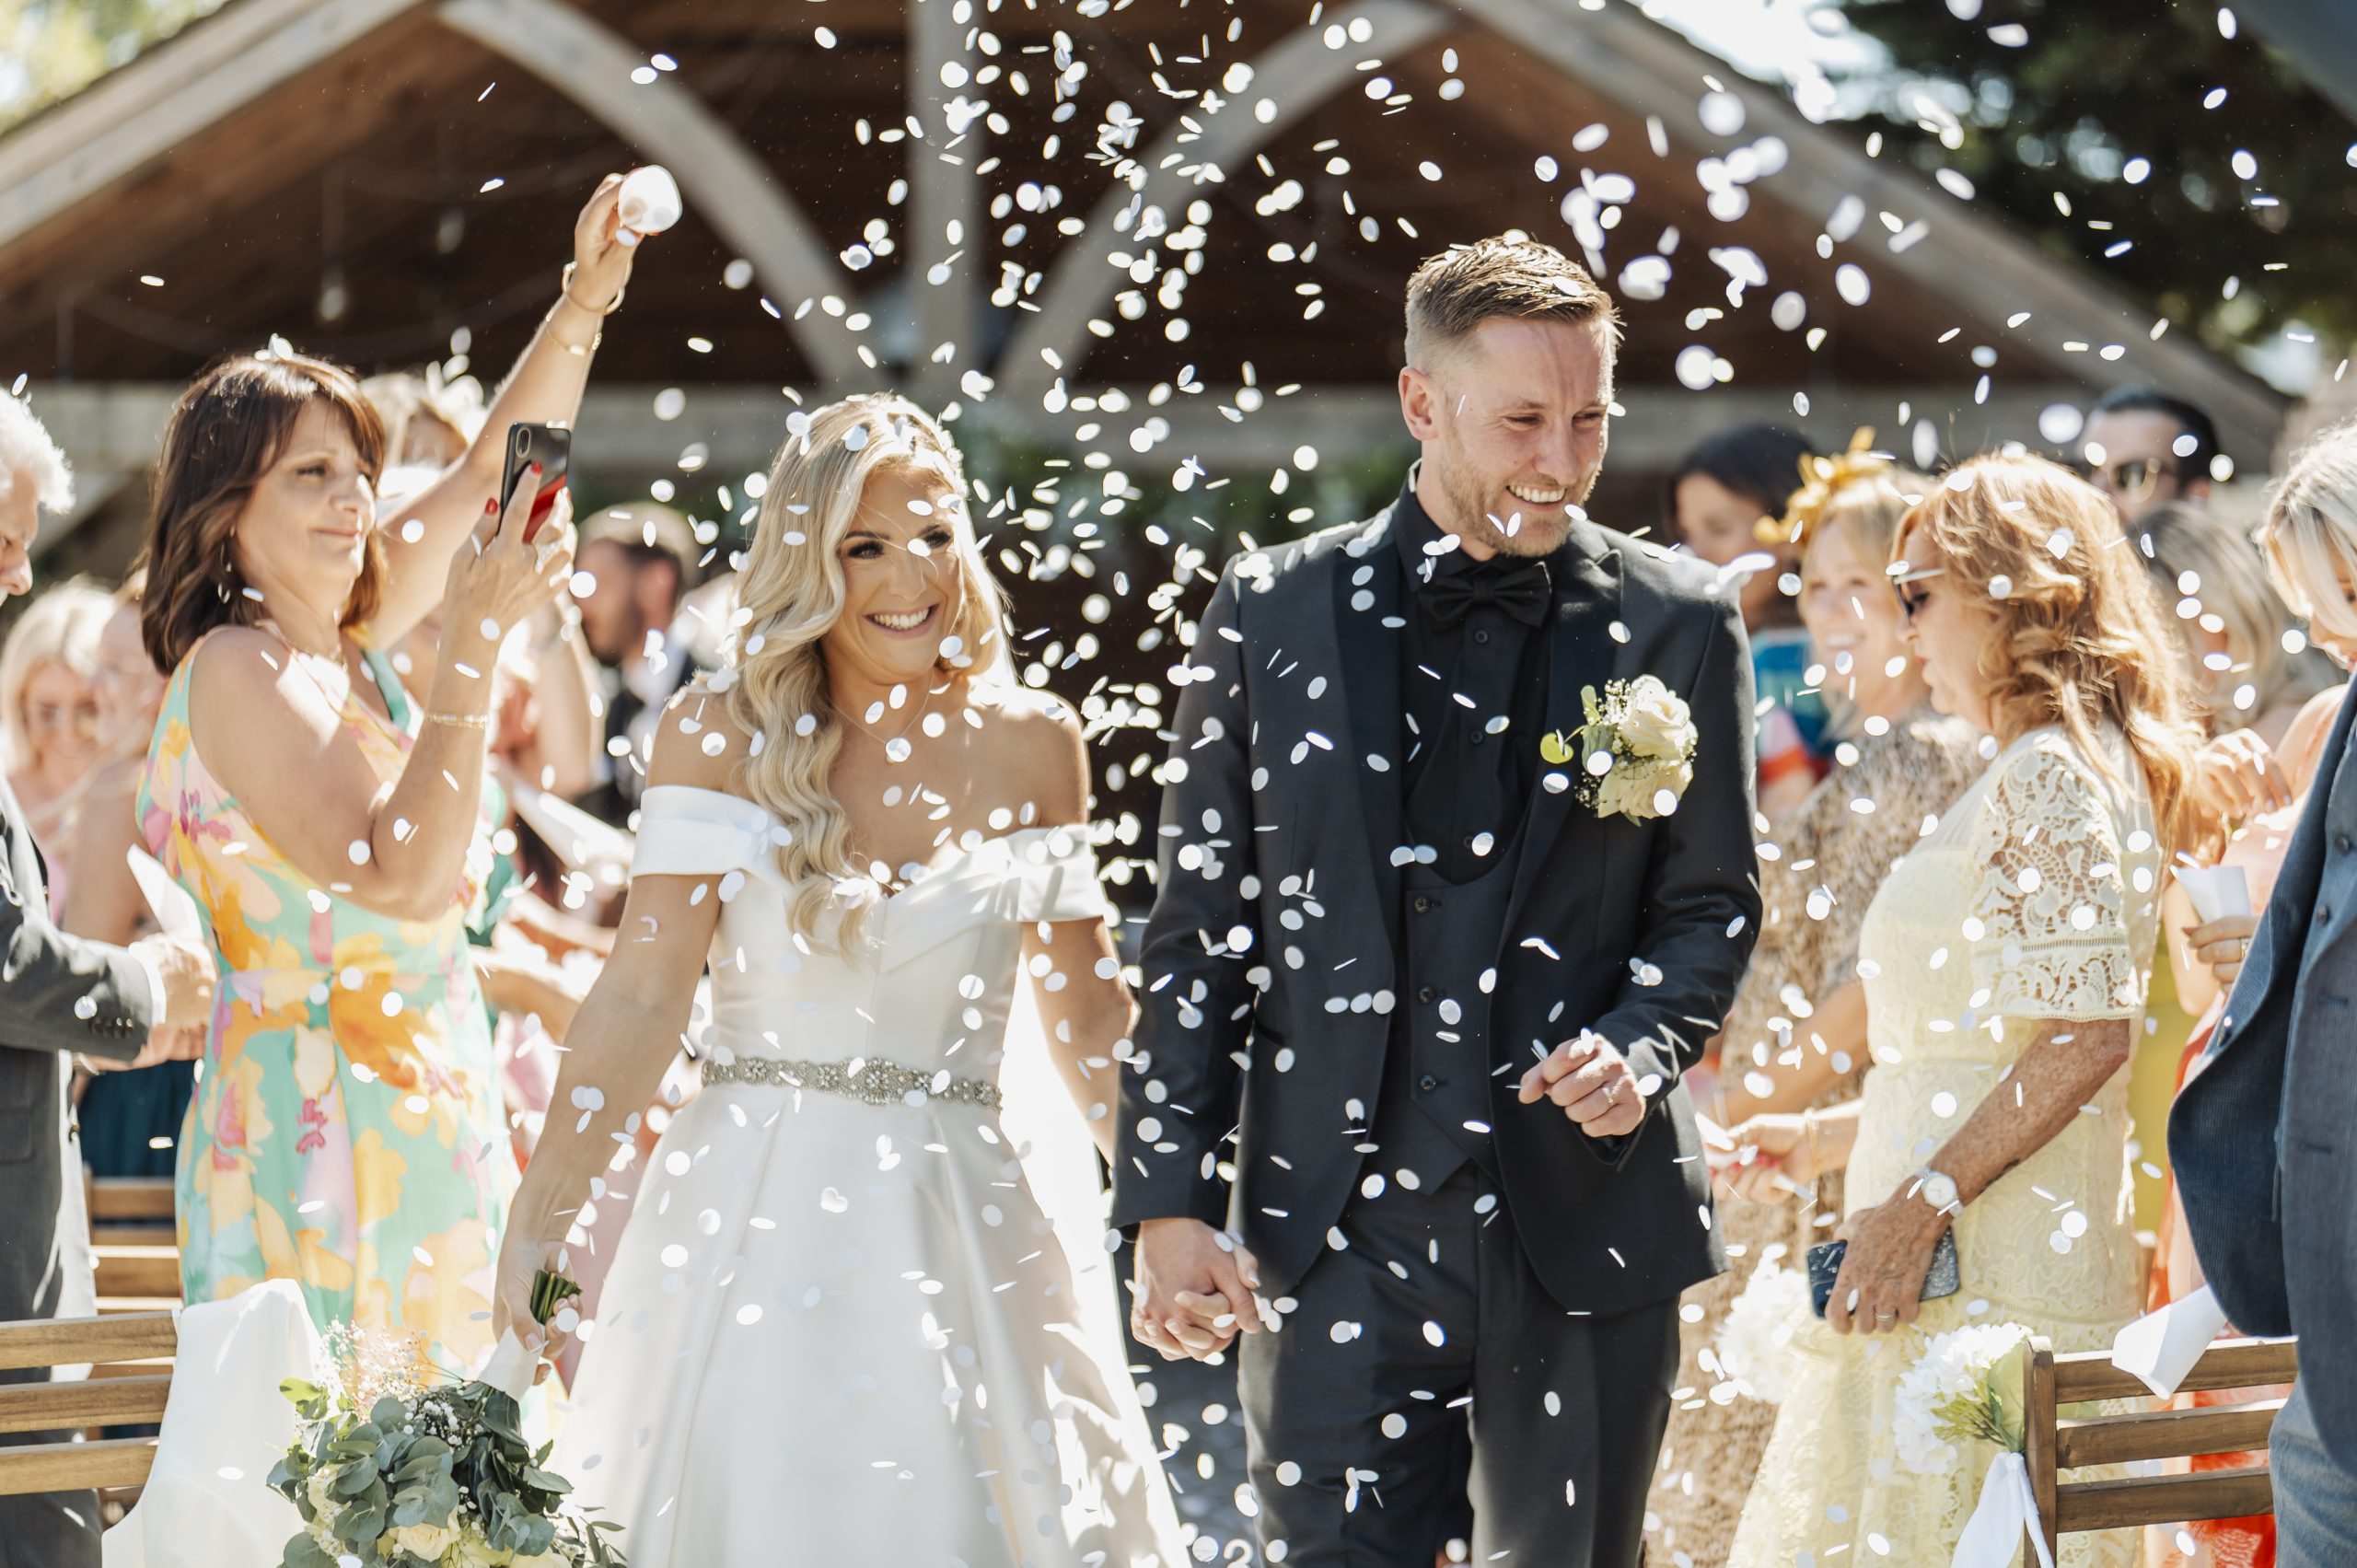 Confetti being thrown over the bride & groom